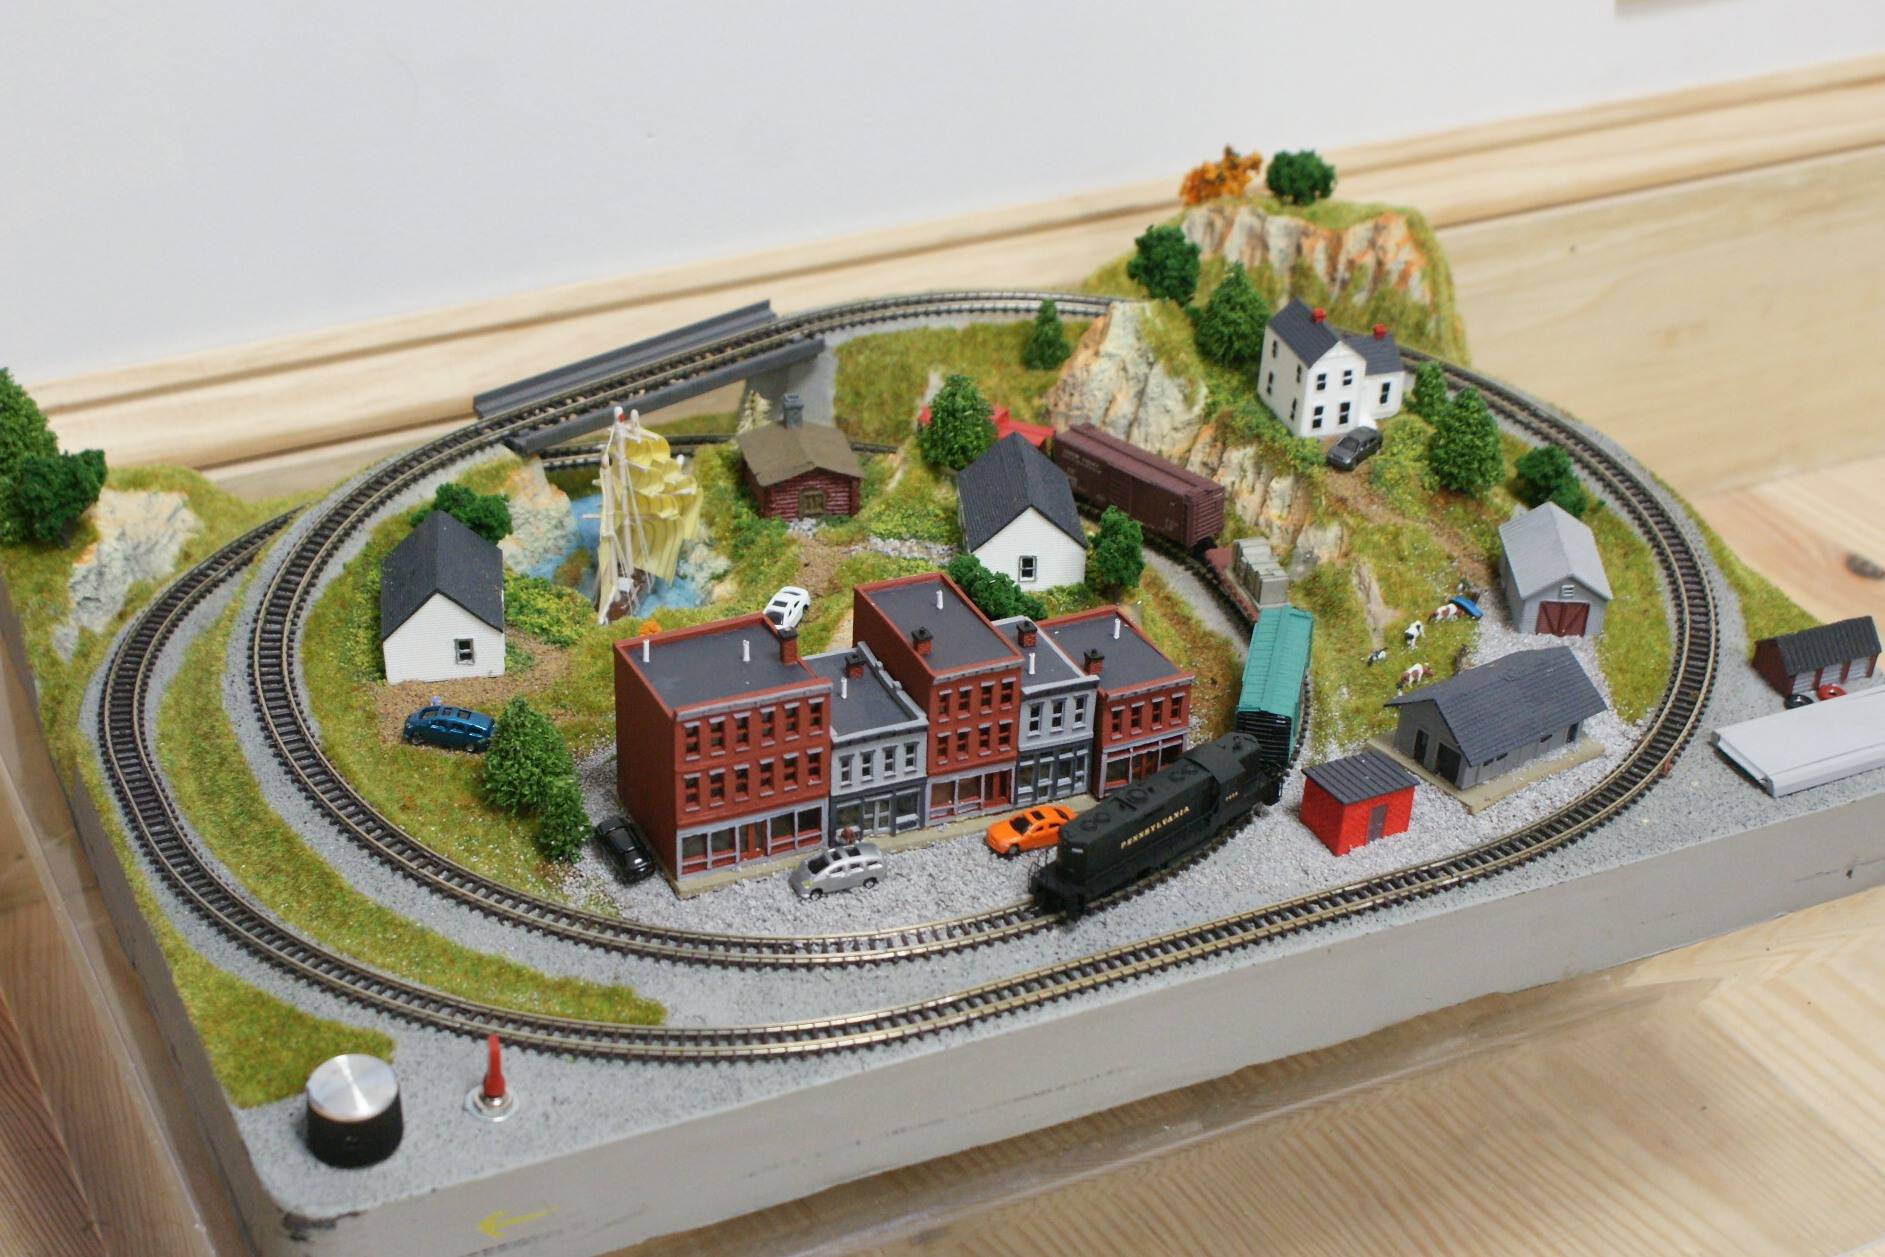 self-to-build-popular-ho-trains-layouts-pictures